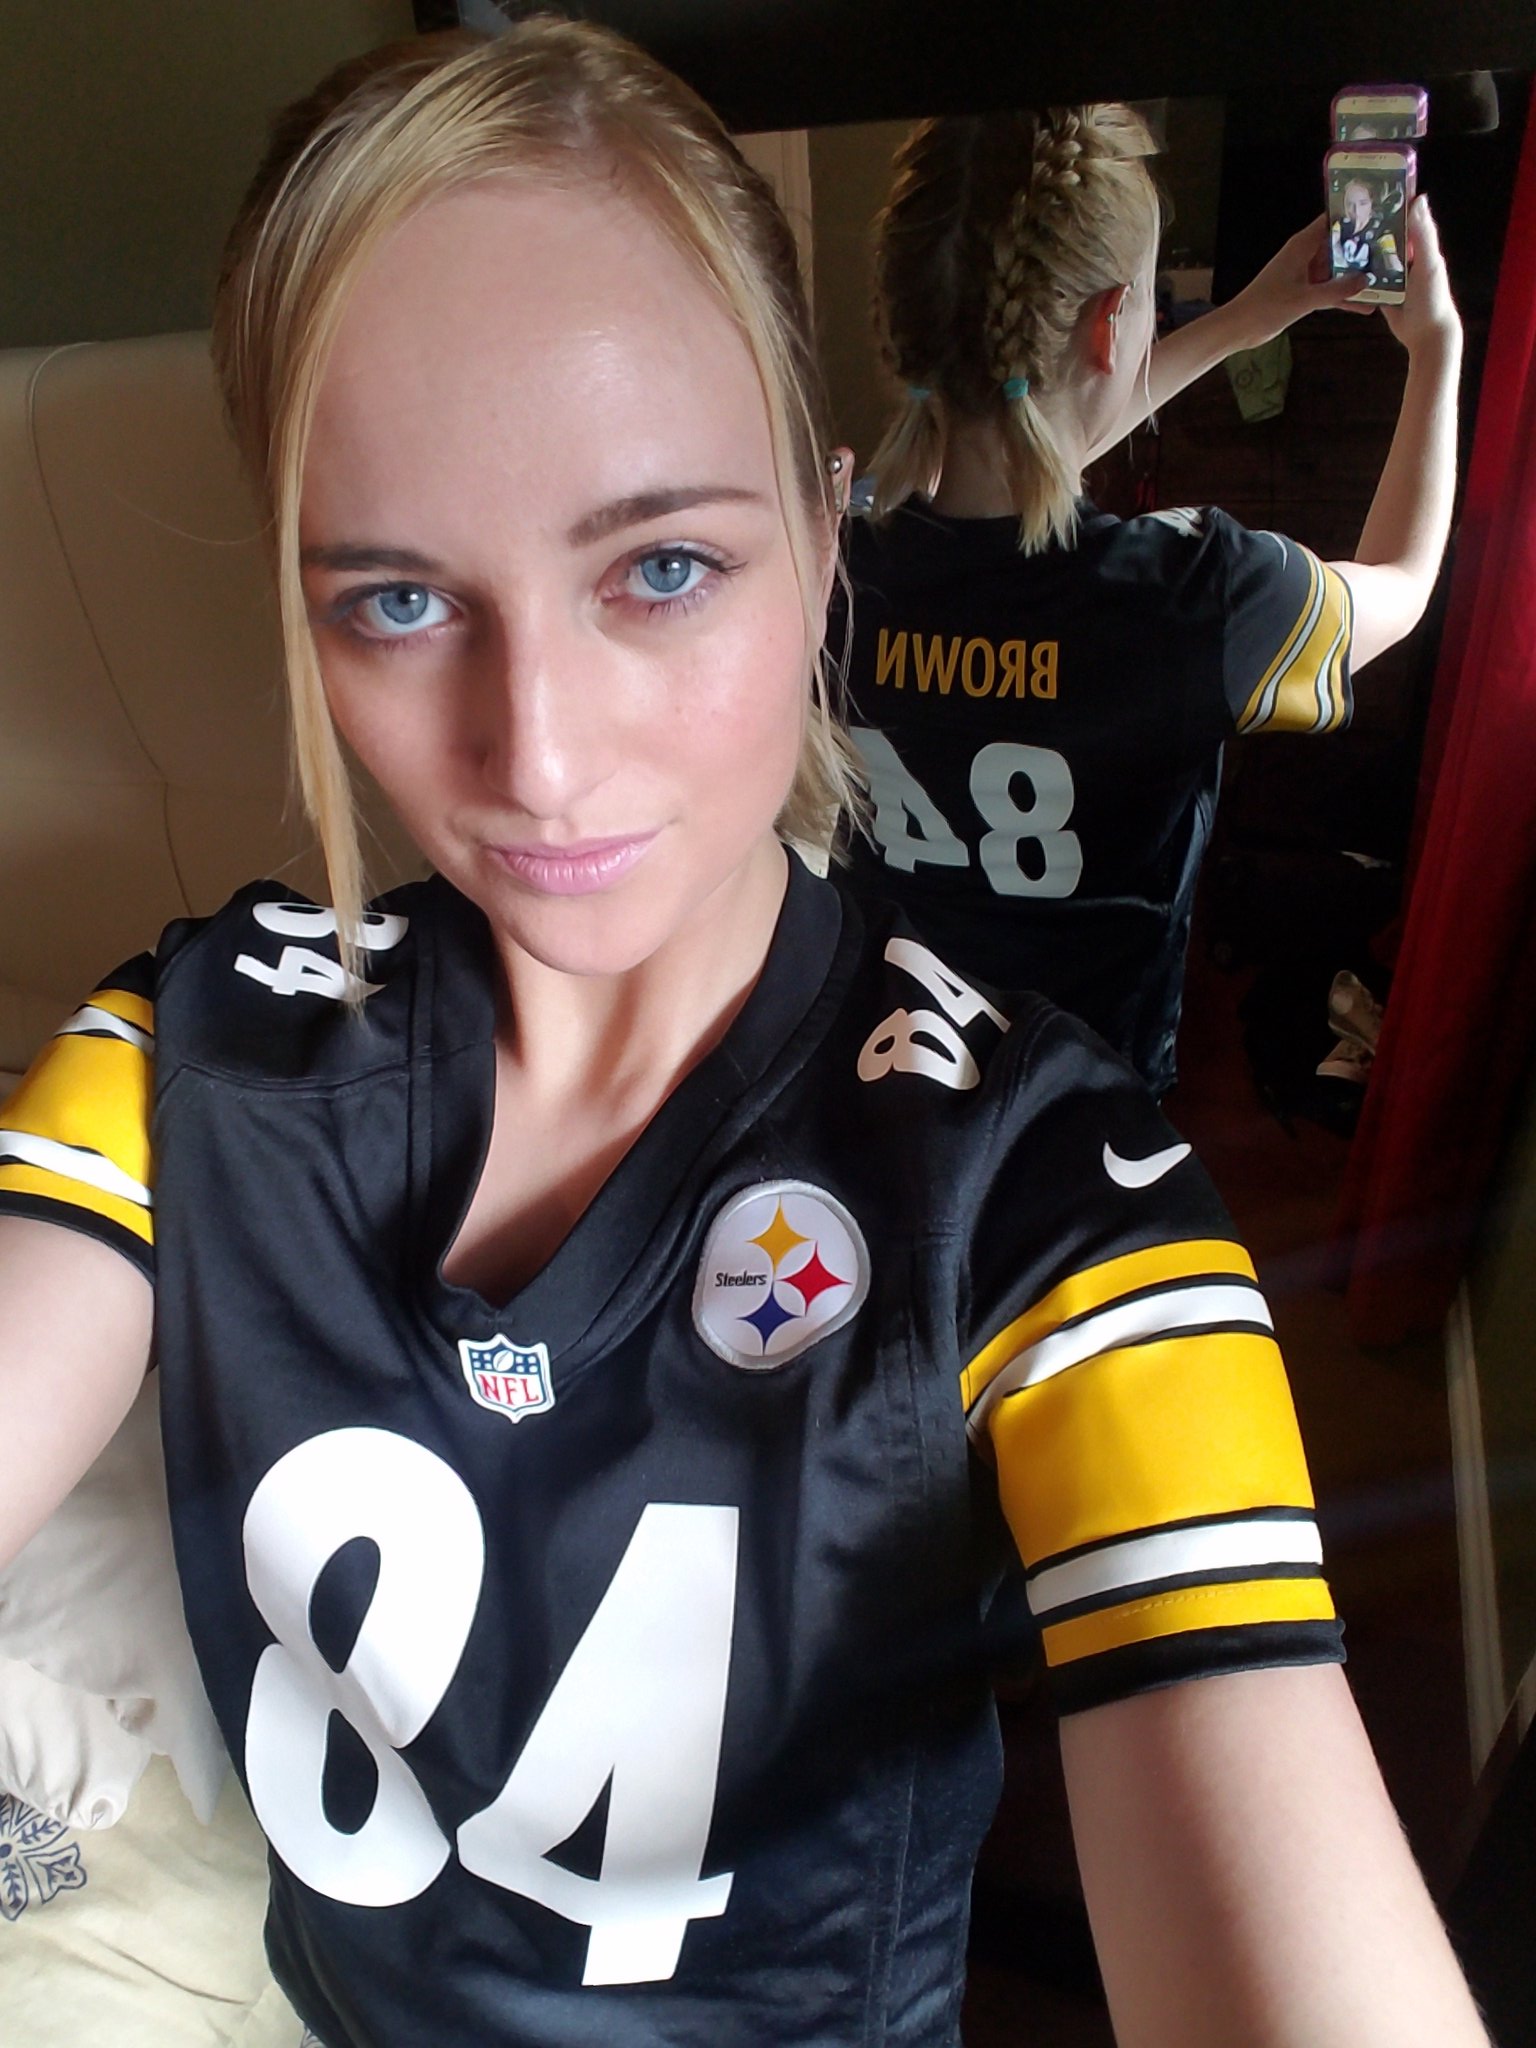 2 pic. This is it!!! We gotta win this game! #SteelersNation #GoSteelers #HereWeGo #antoniobrown #MyBoys